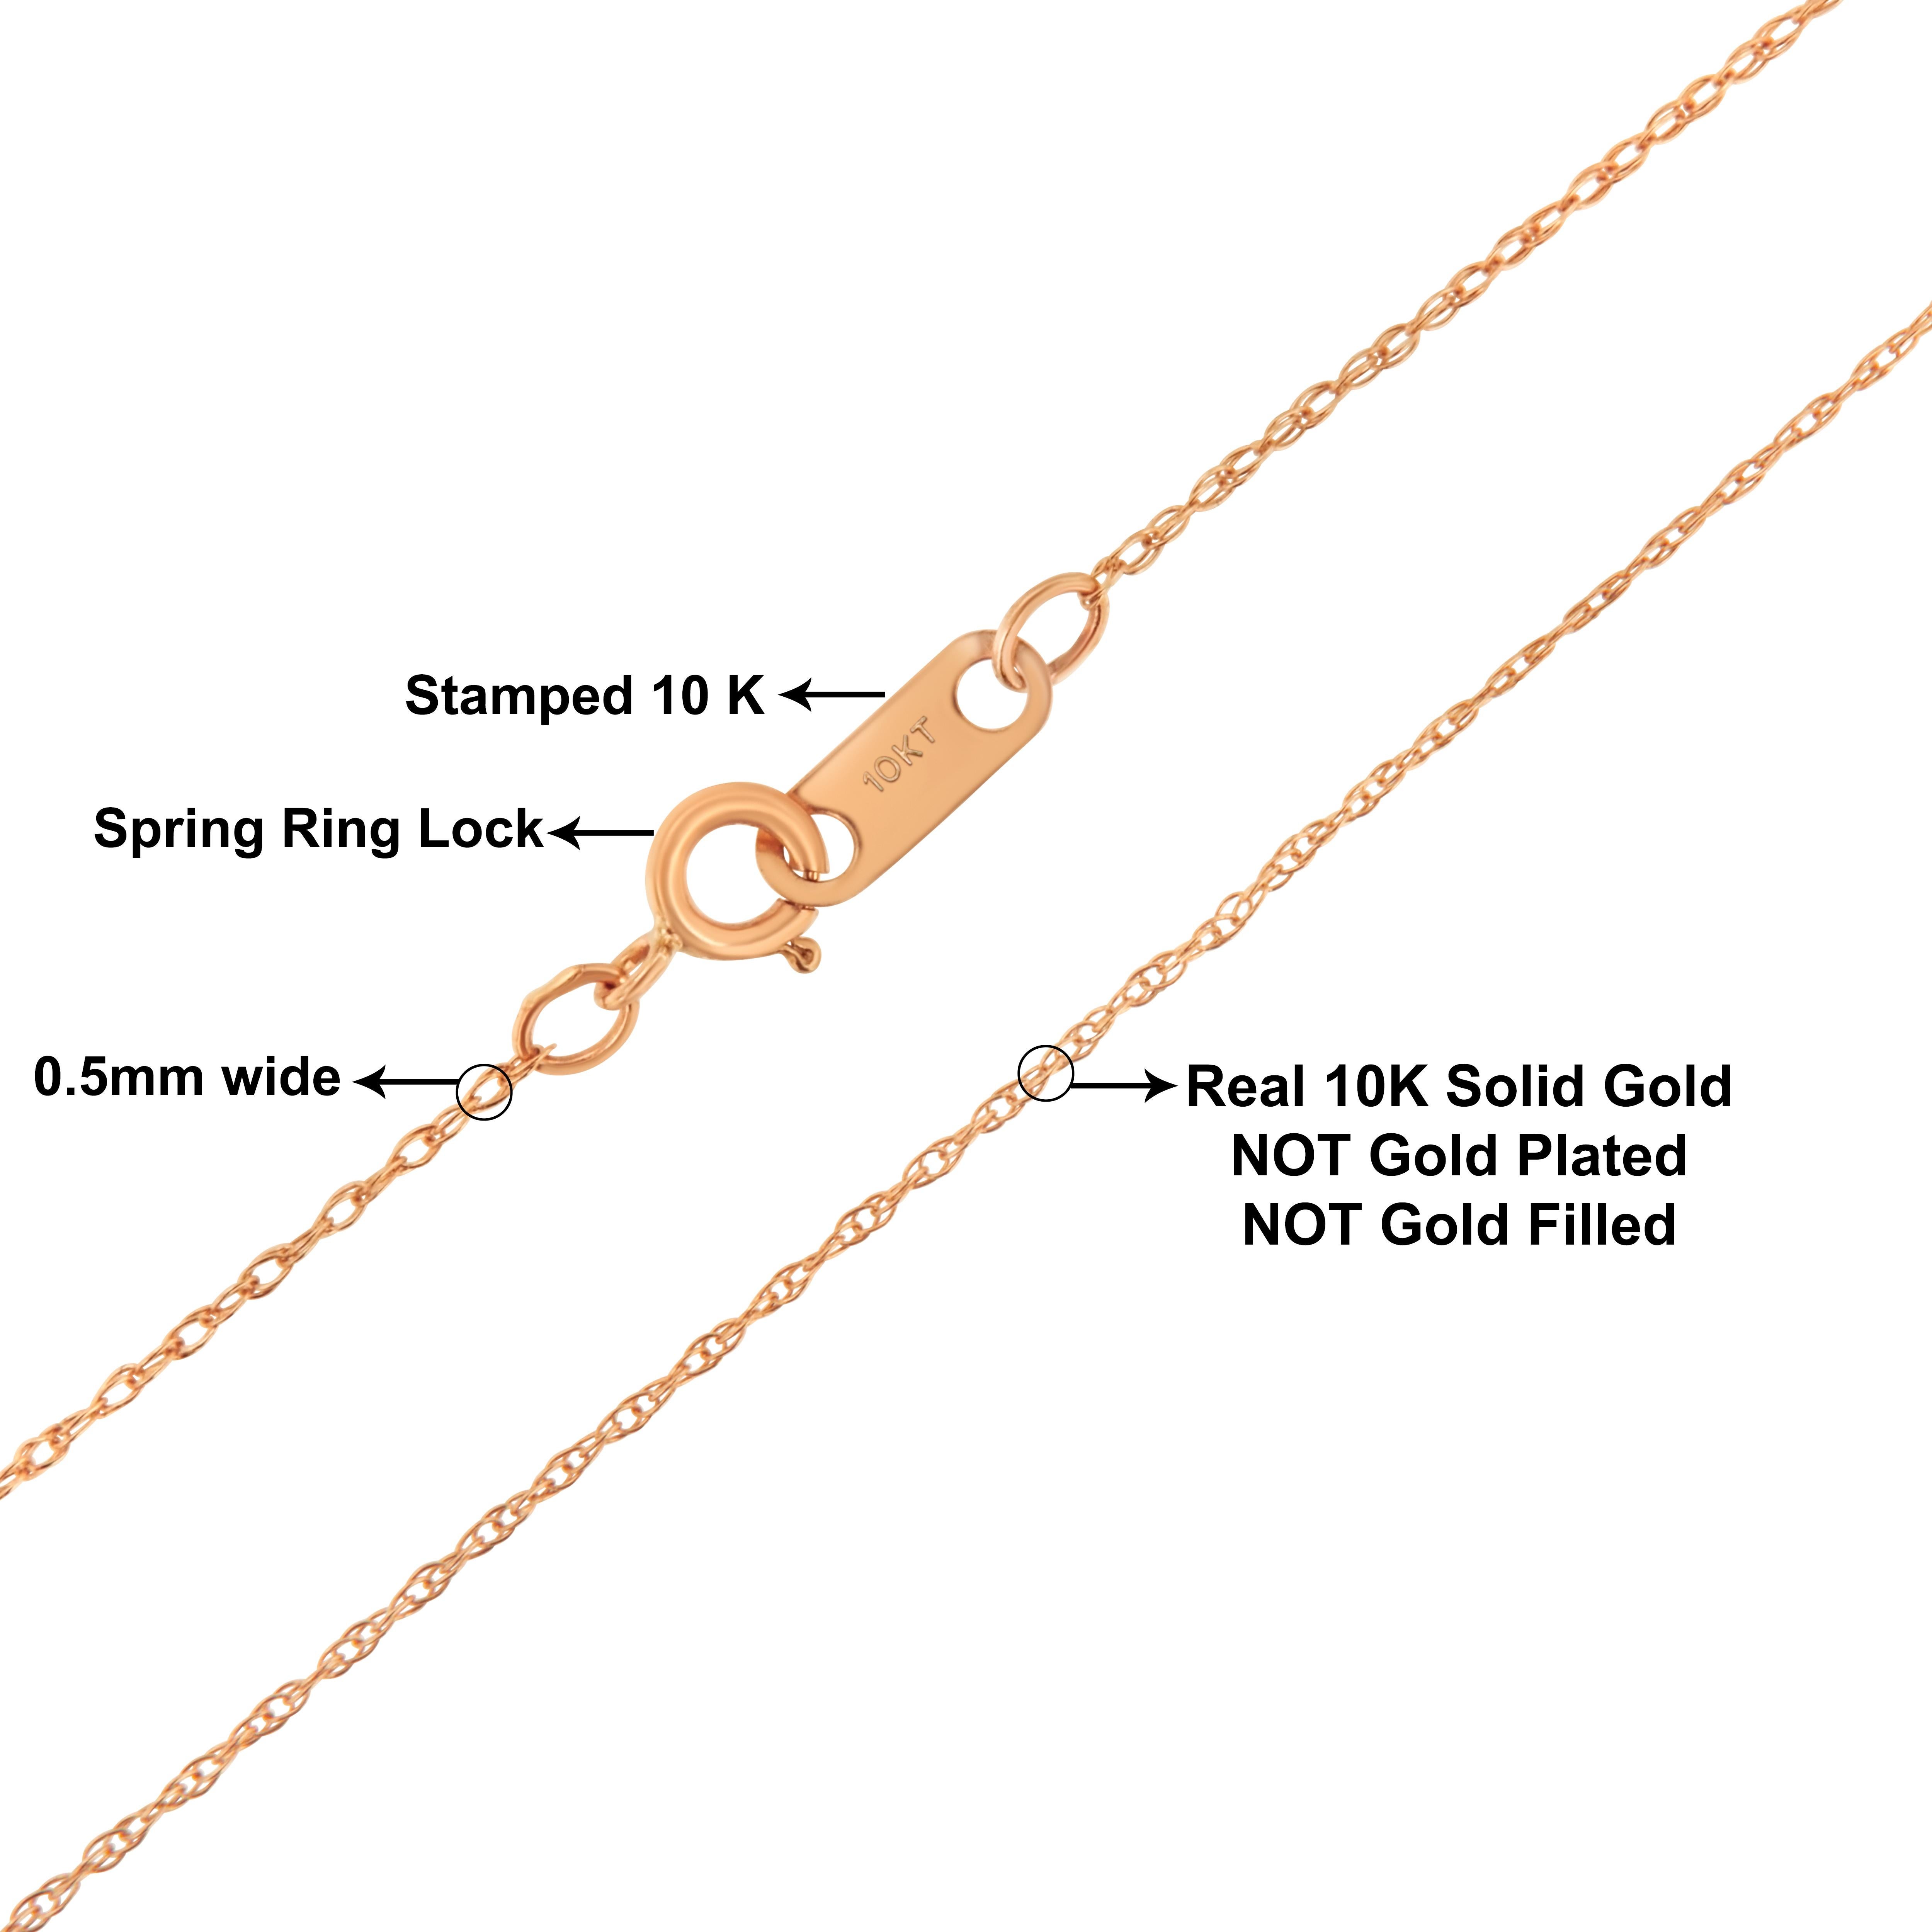 A simple and dainty 10K rose gold rope chain measuring 16 inches in length fastens securely with a standard spring ring clasp. This chain can replace most chains and is perfect paired with small to medium size pendants. The chain measures